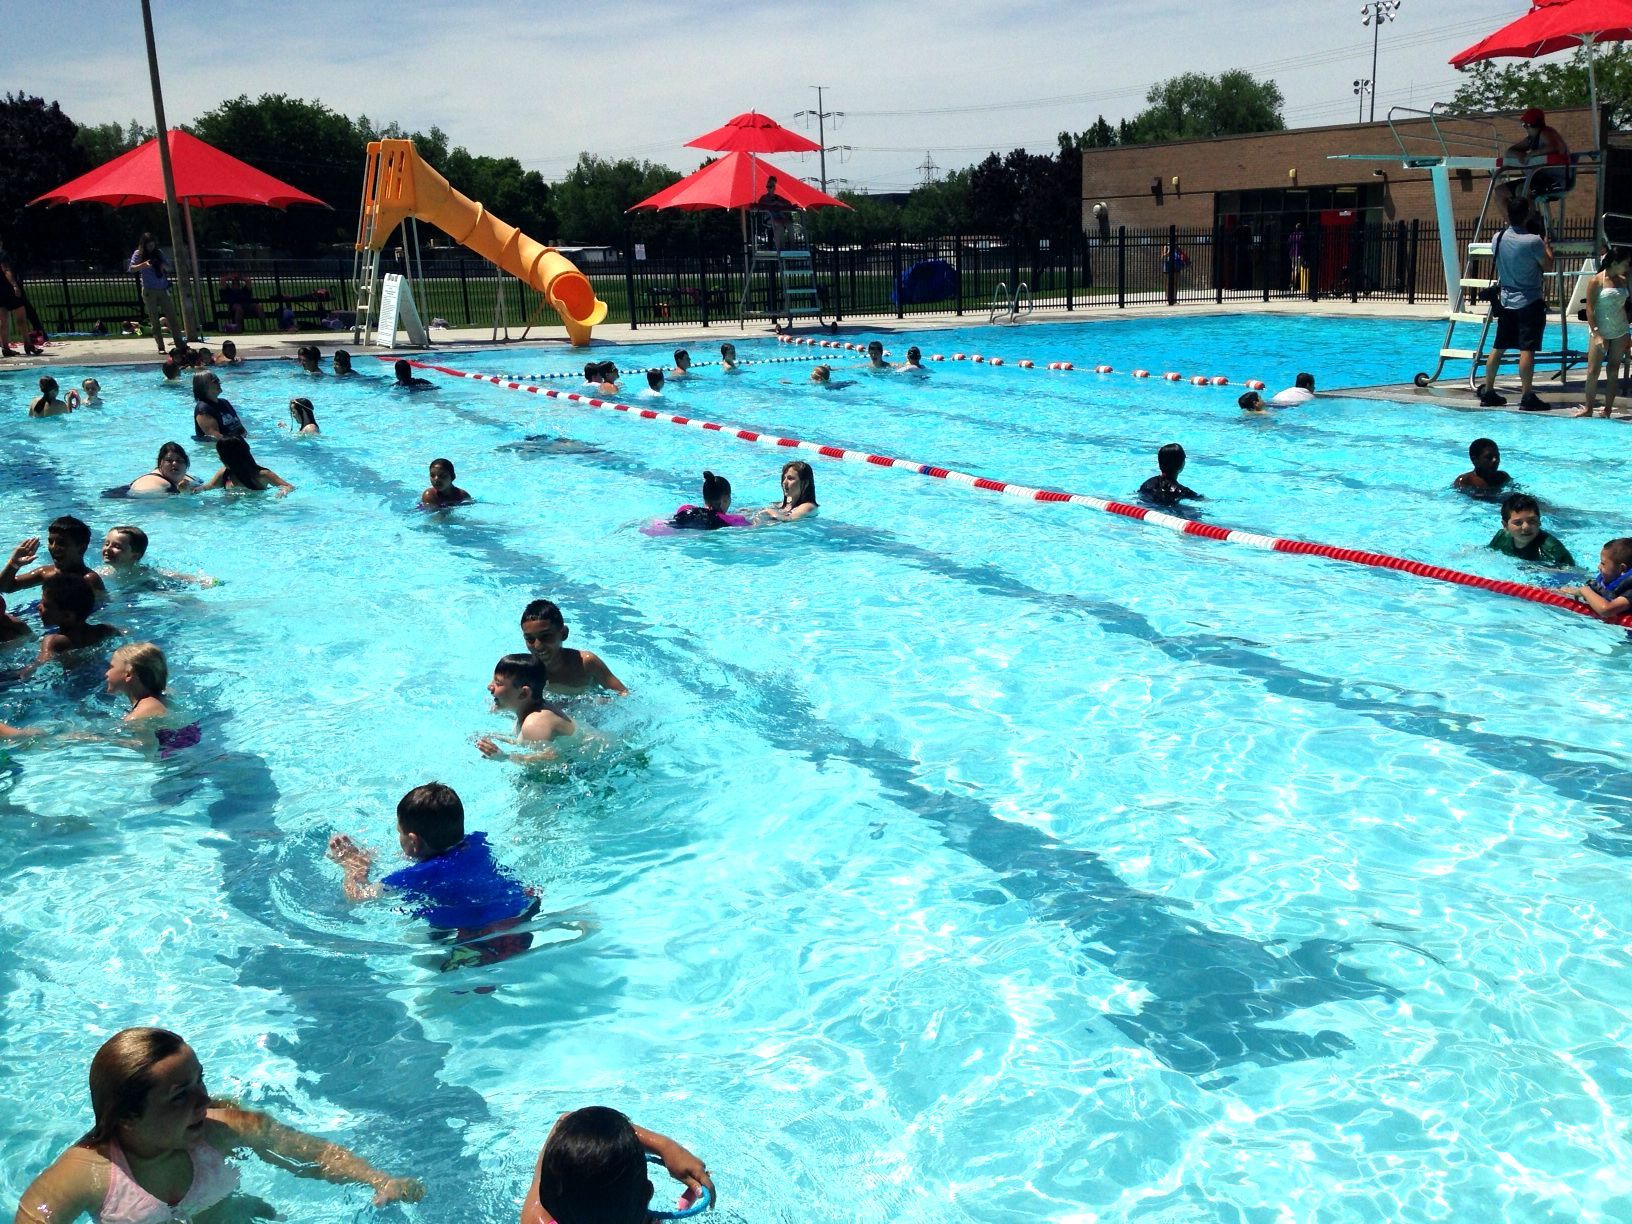 Children enjoy the Redwood Recreation Center's outdoor pool on a hot summer day.